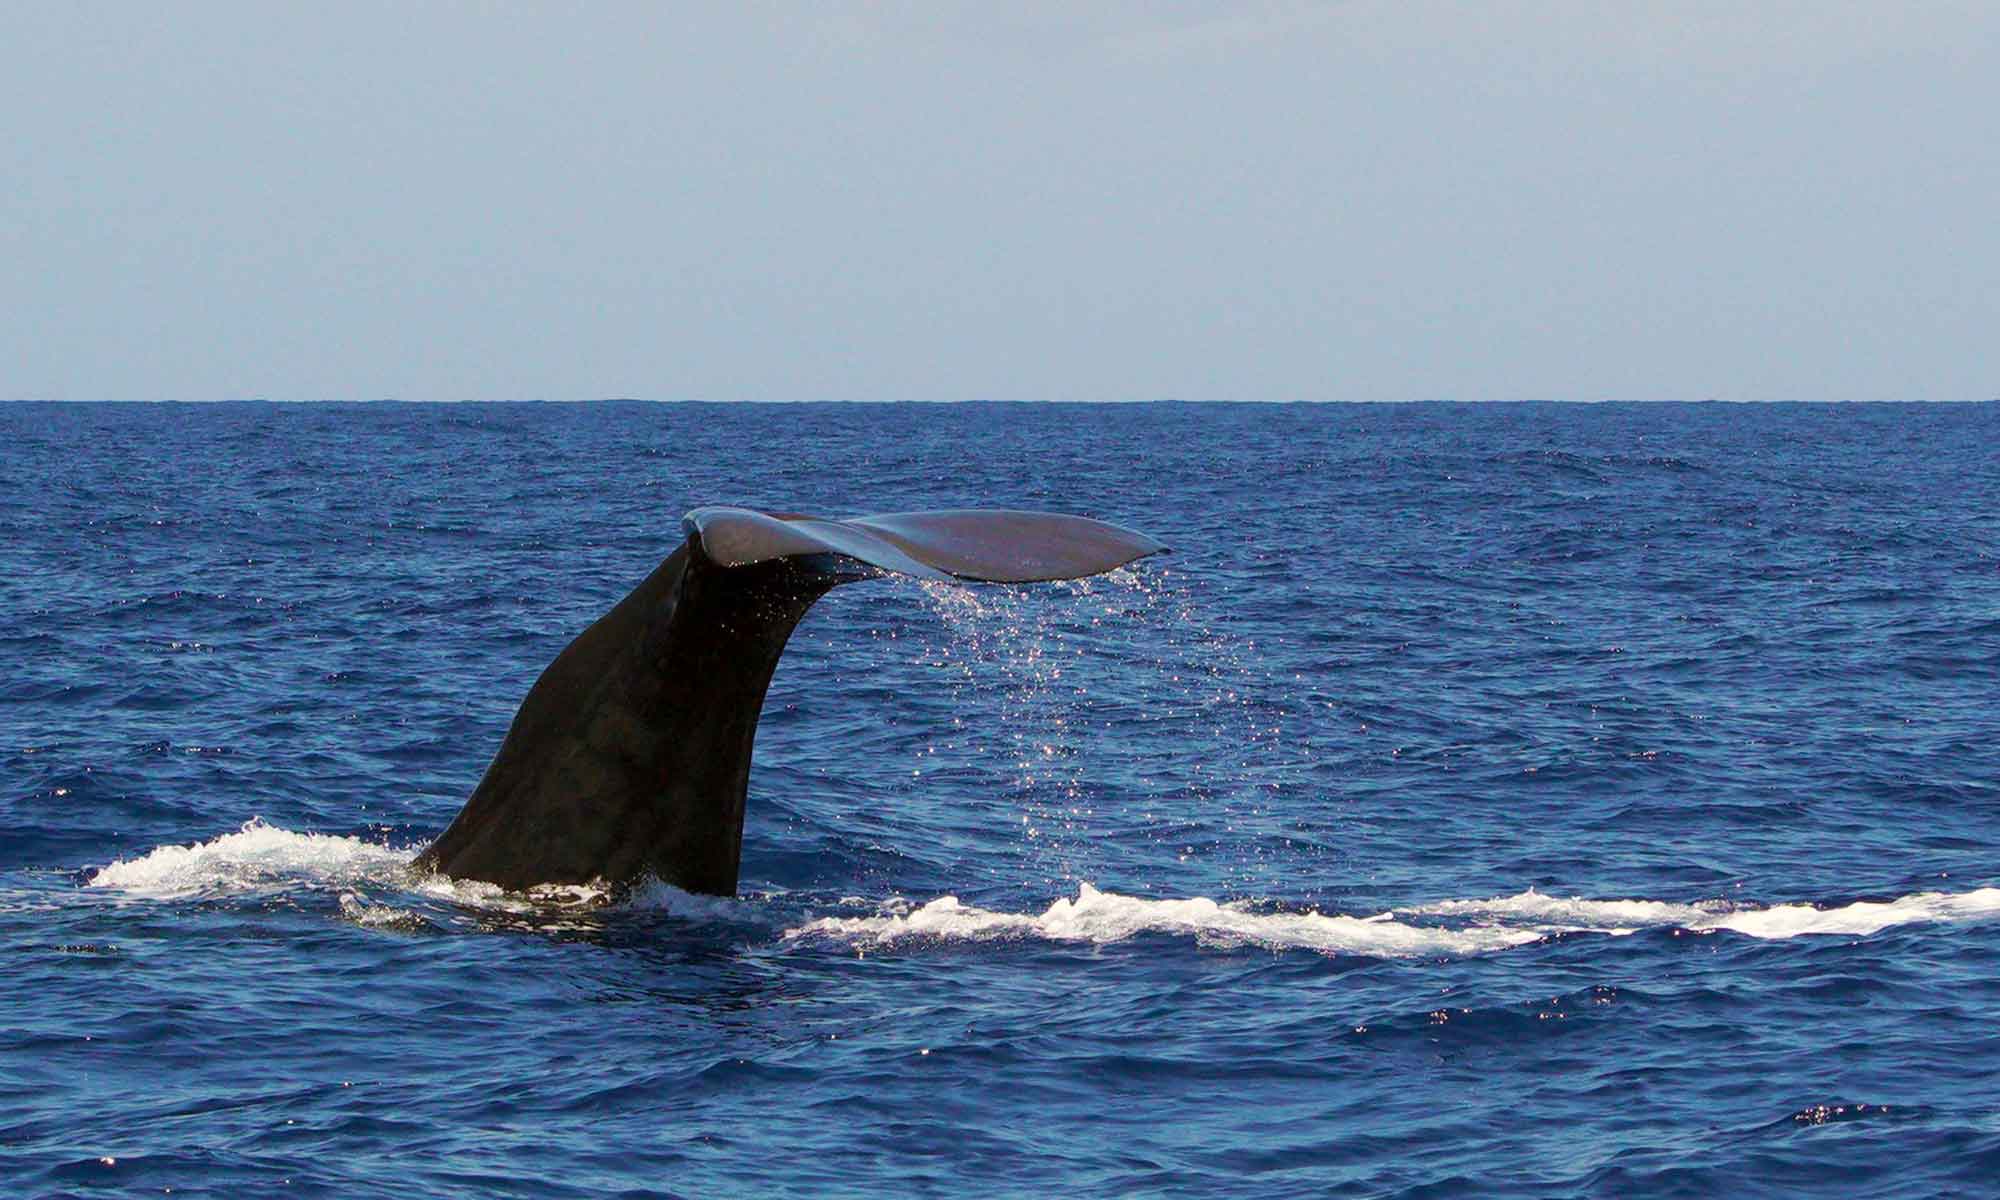 Many Madeira dolphin and whale watching tours saw the famous Sperm whales.